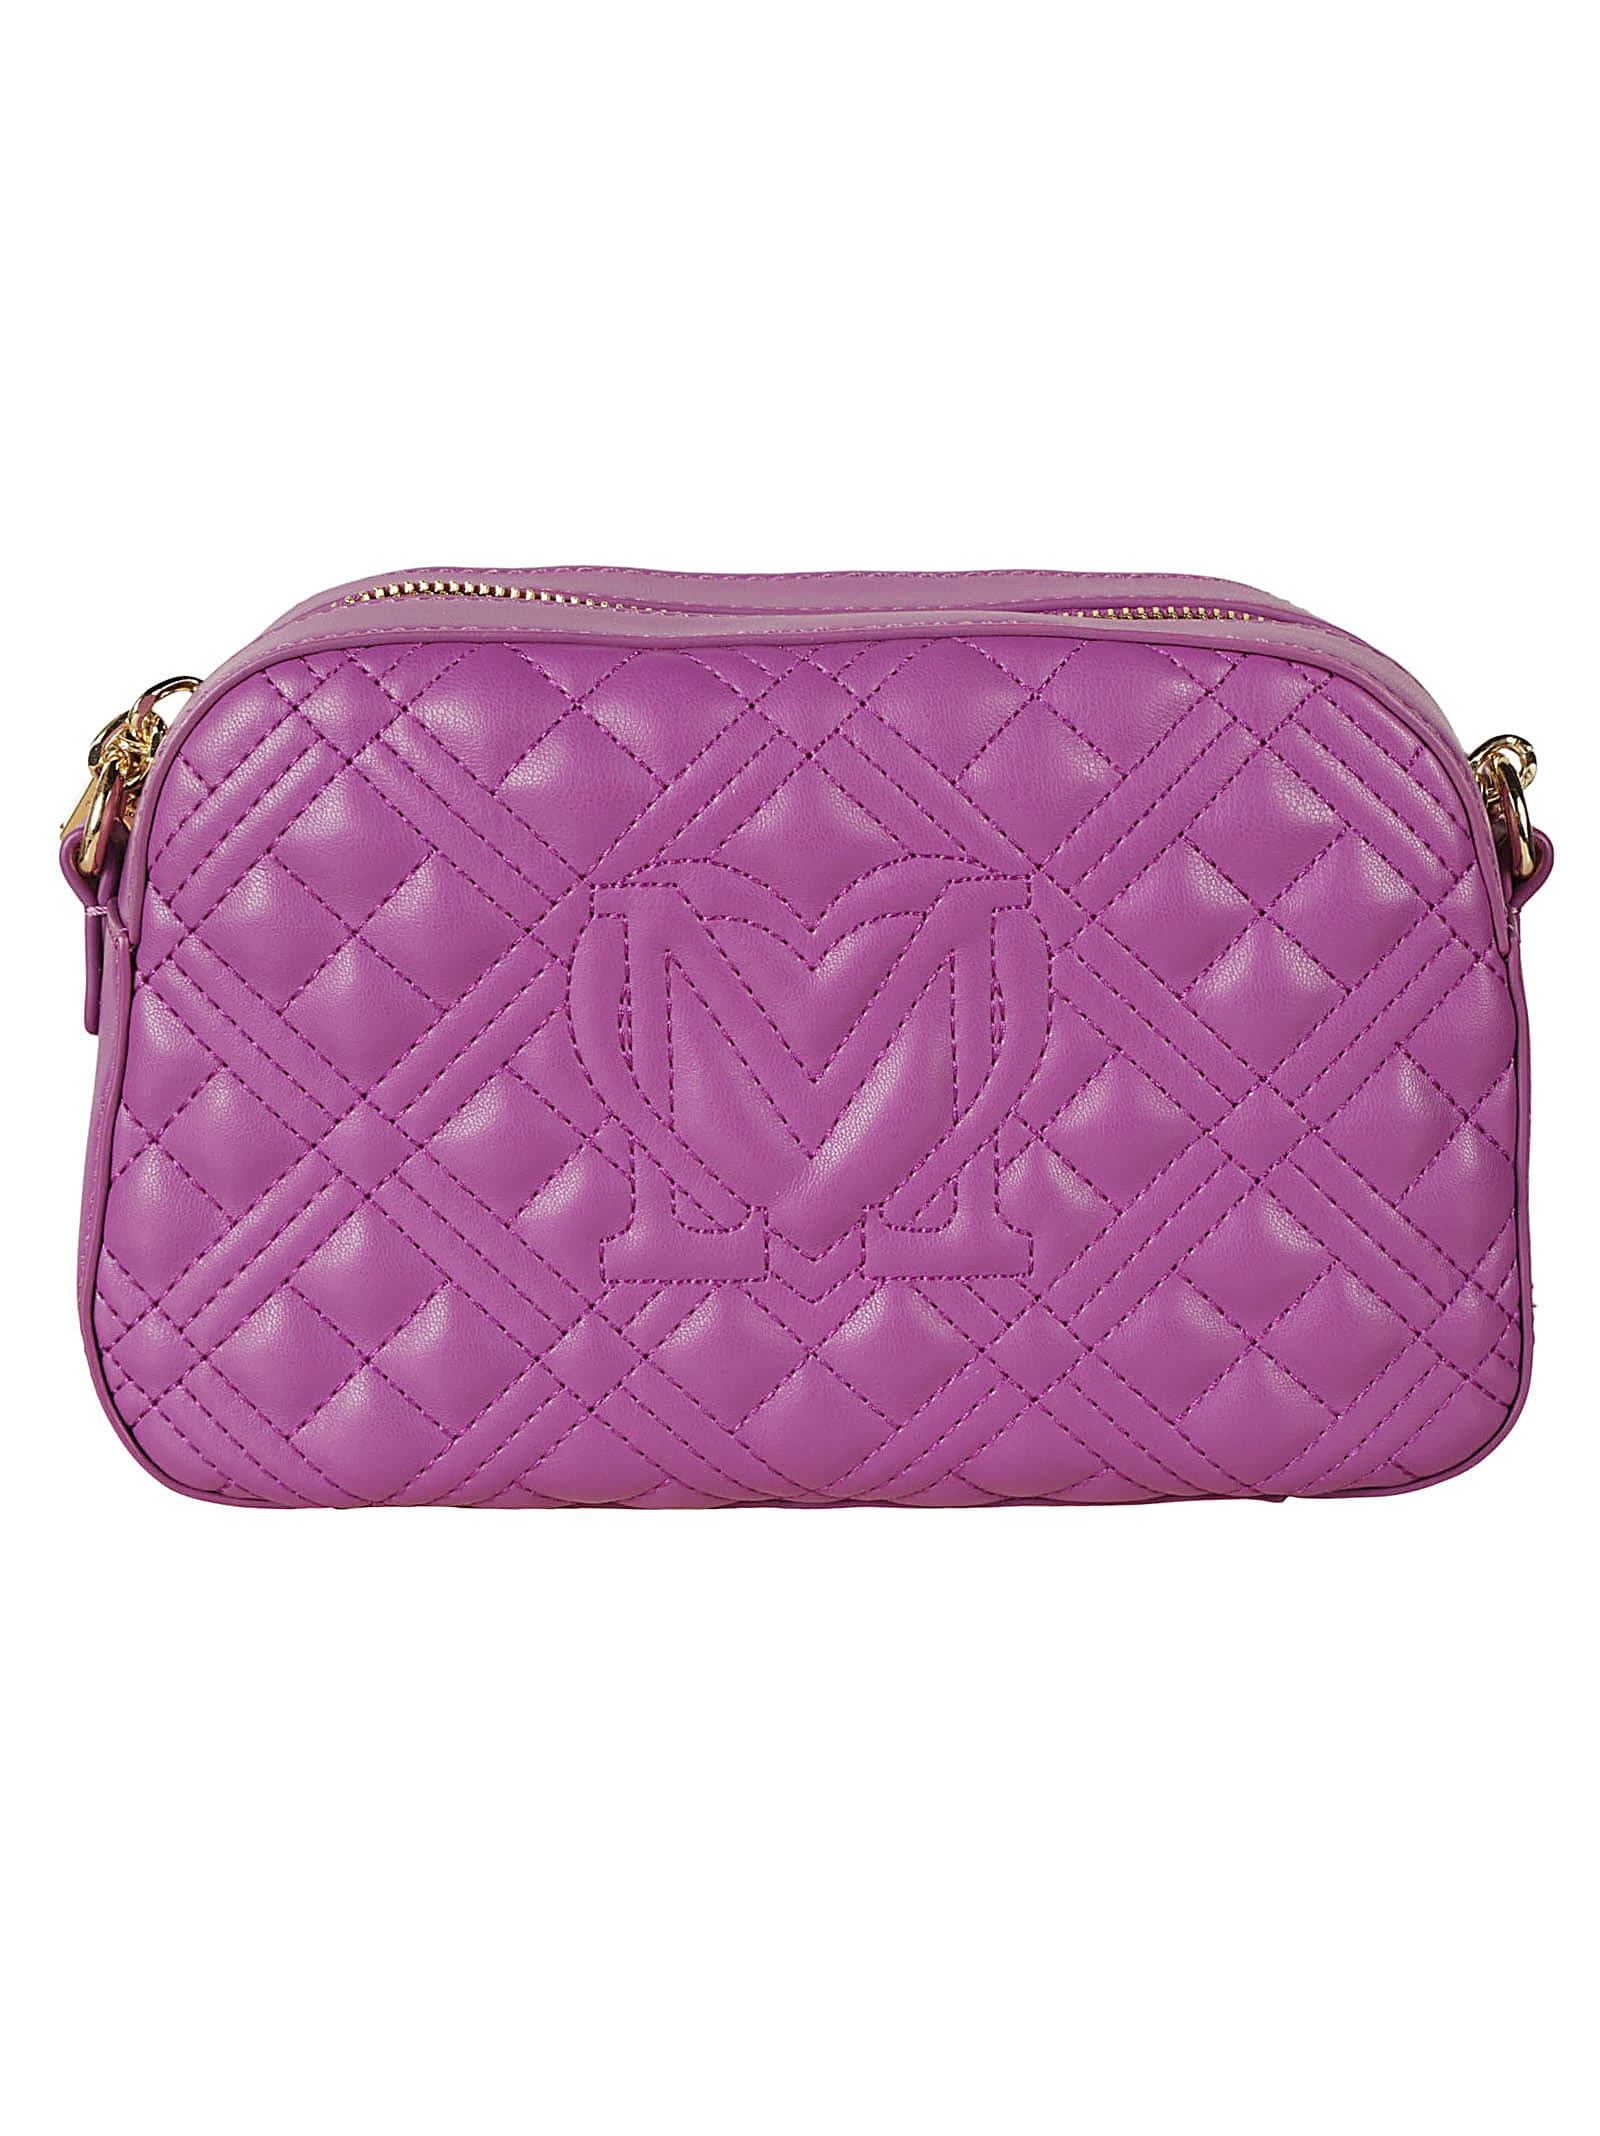 Shop Love Moschino Top Zip Quilted Chain Shoulder Bag In Purple